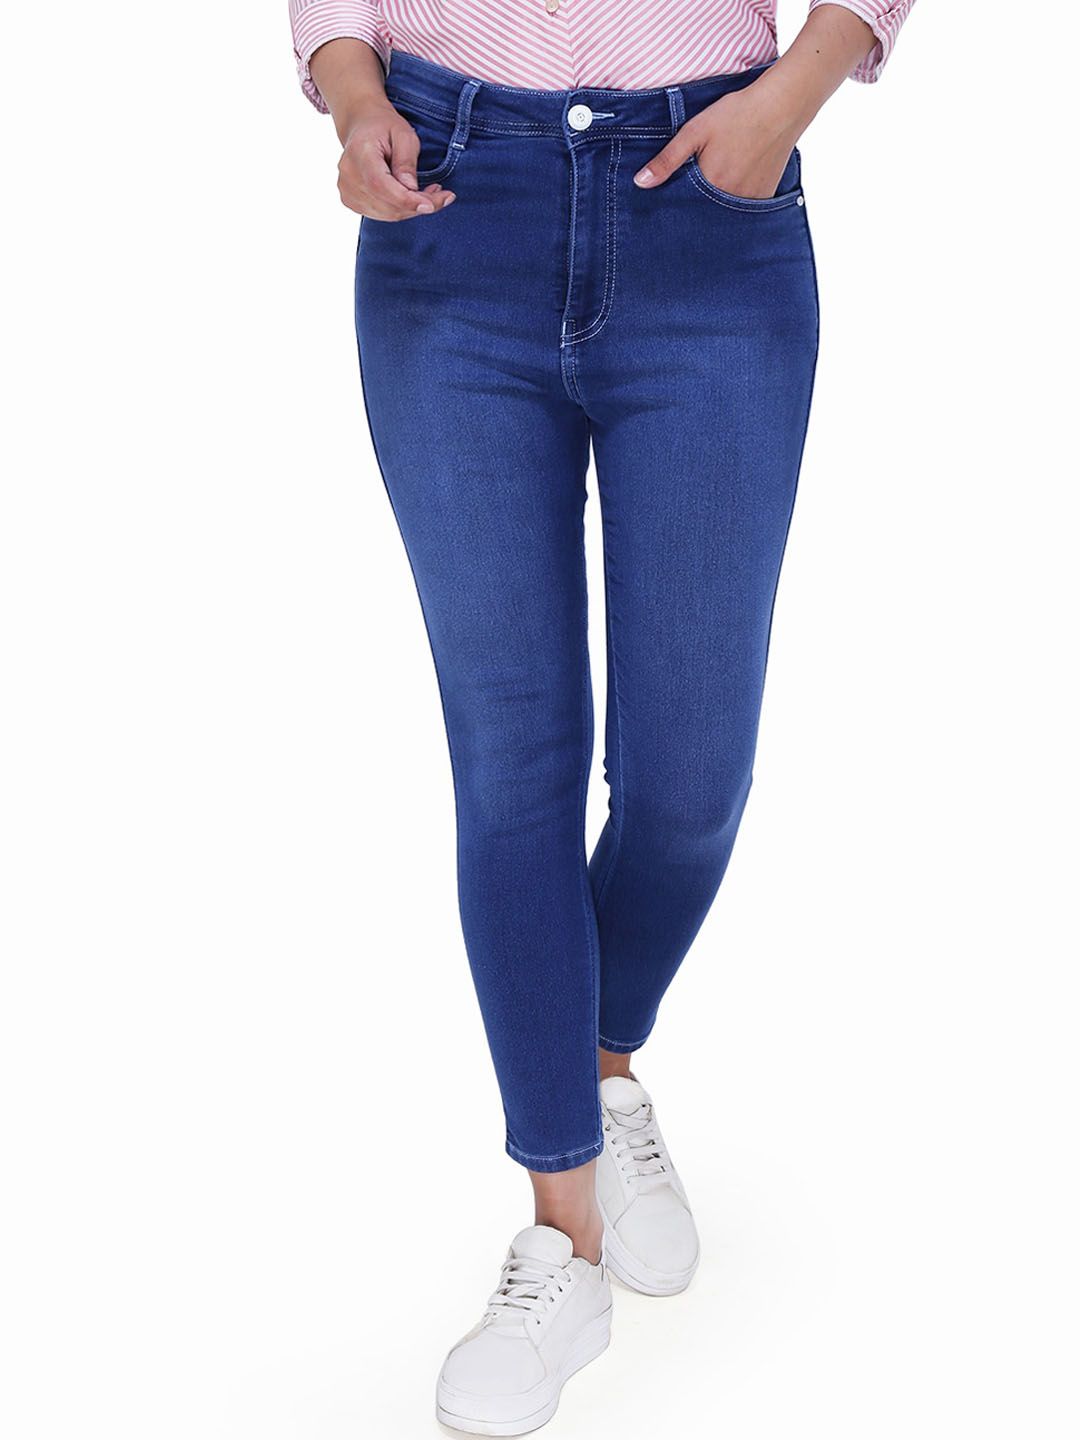 FCK-3 Women Blue Jean Light Fade Stretchable Jeans Price in India